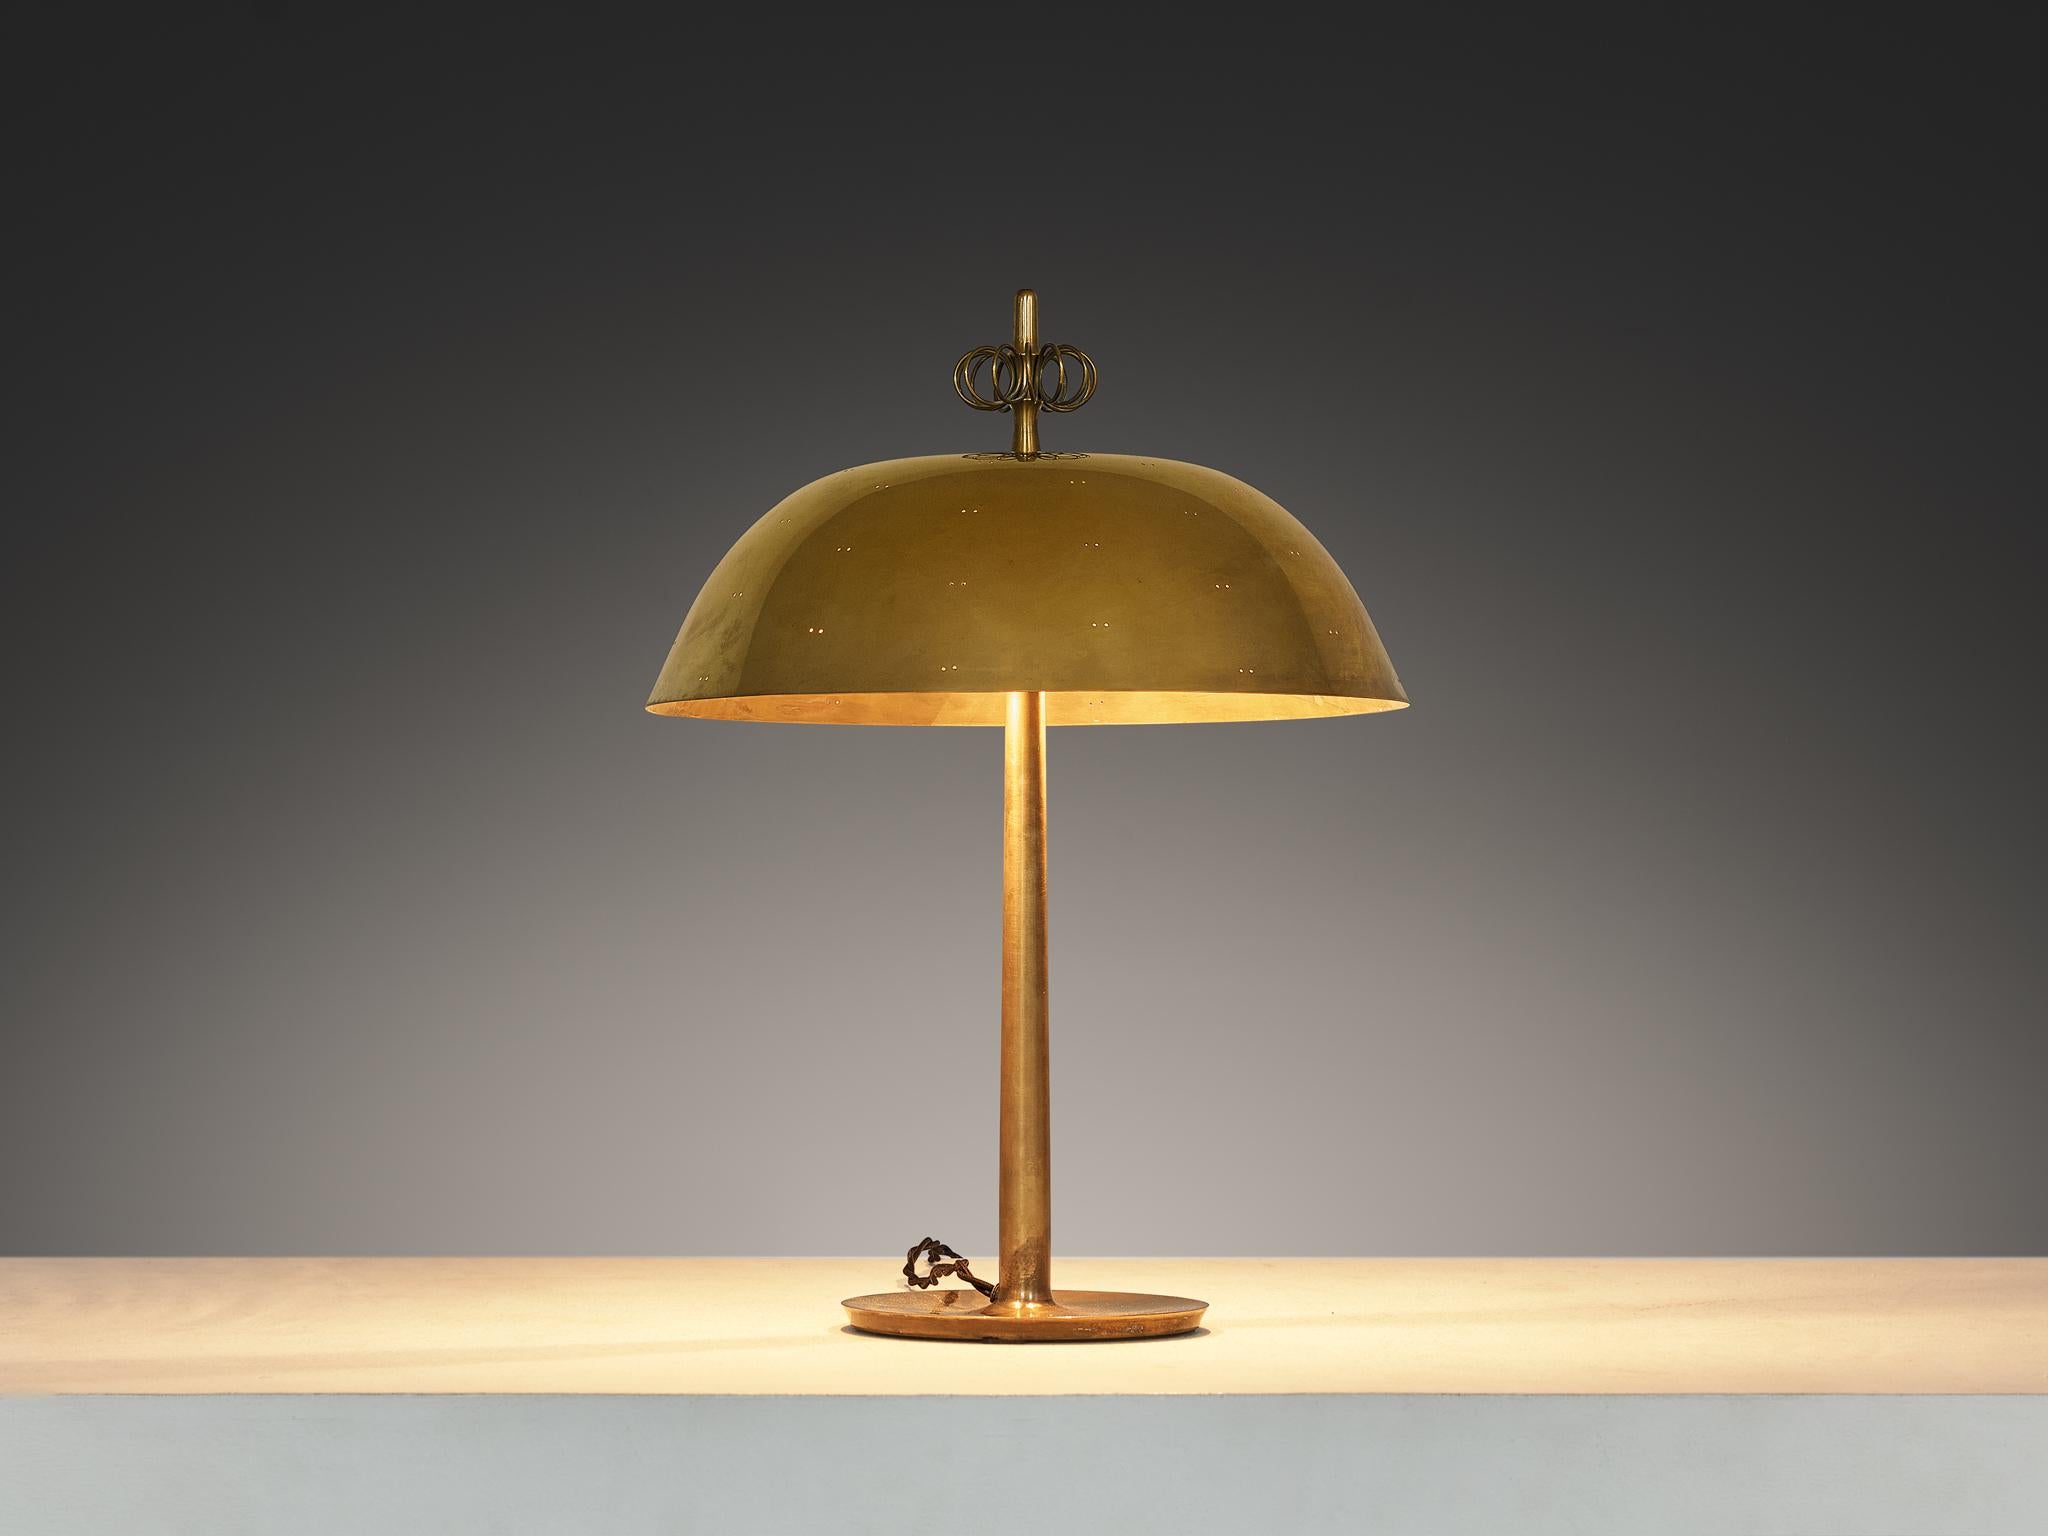 Paavo Tynell for Taito Oy, table lamp, model '9211', brass, Finland, 1940s
 
A truly magnificent piece that scores highly on every design aspect: execution, material use, craftsmanship and detail. Paavo Tynell, the master in the fields of lighting,